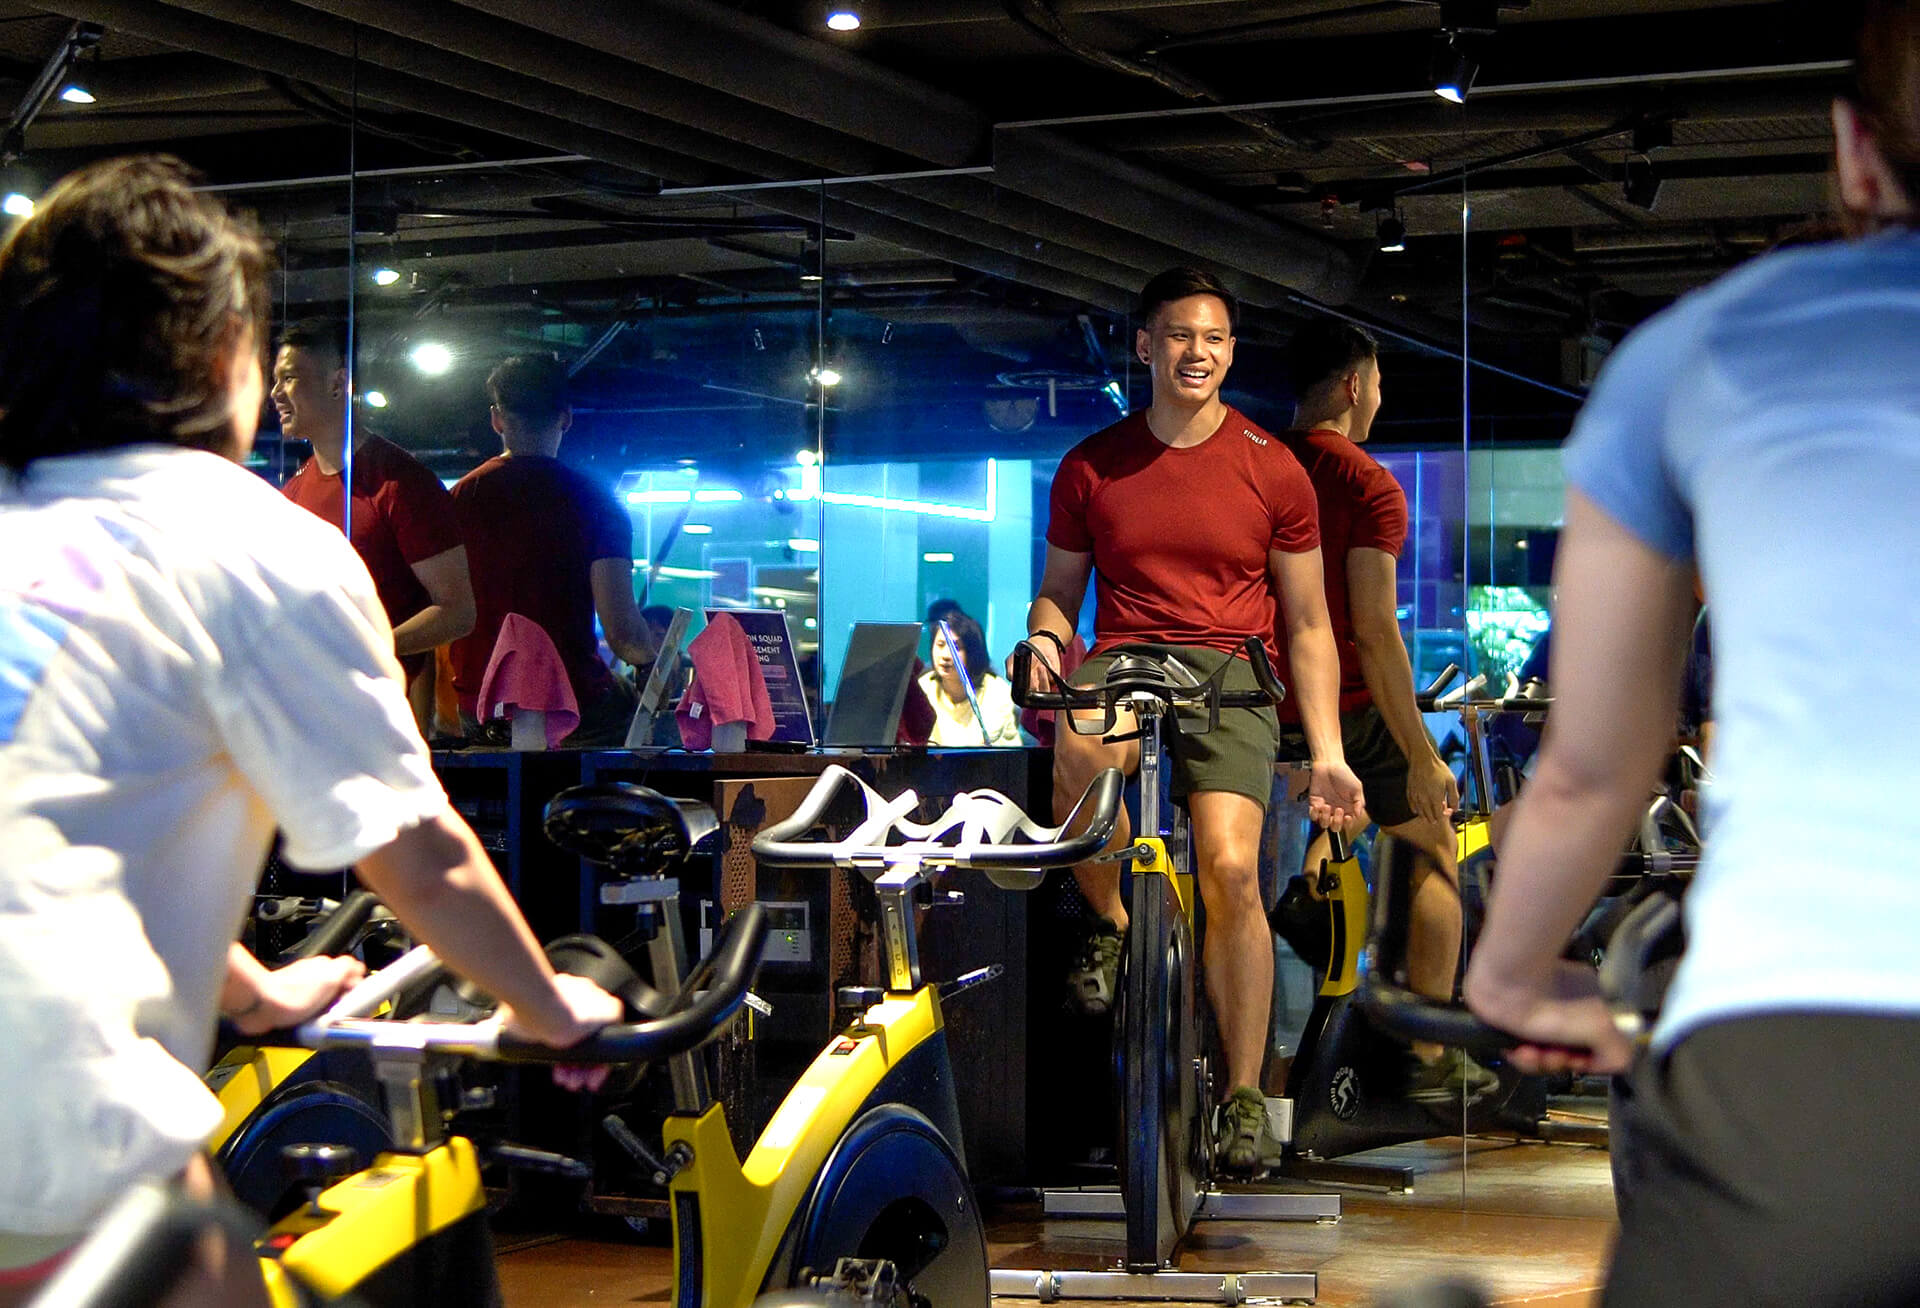 A spinning session is an incredible cardio workout.